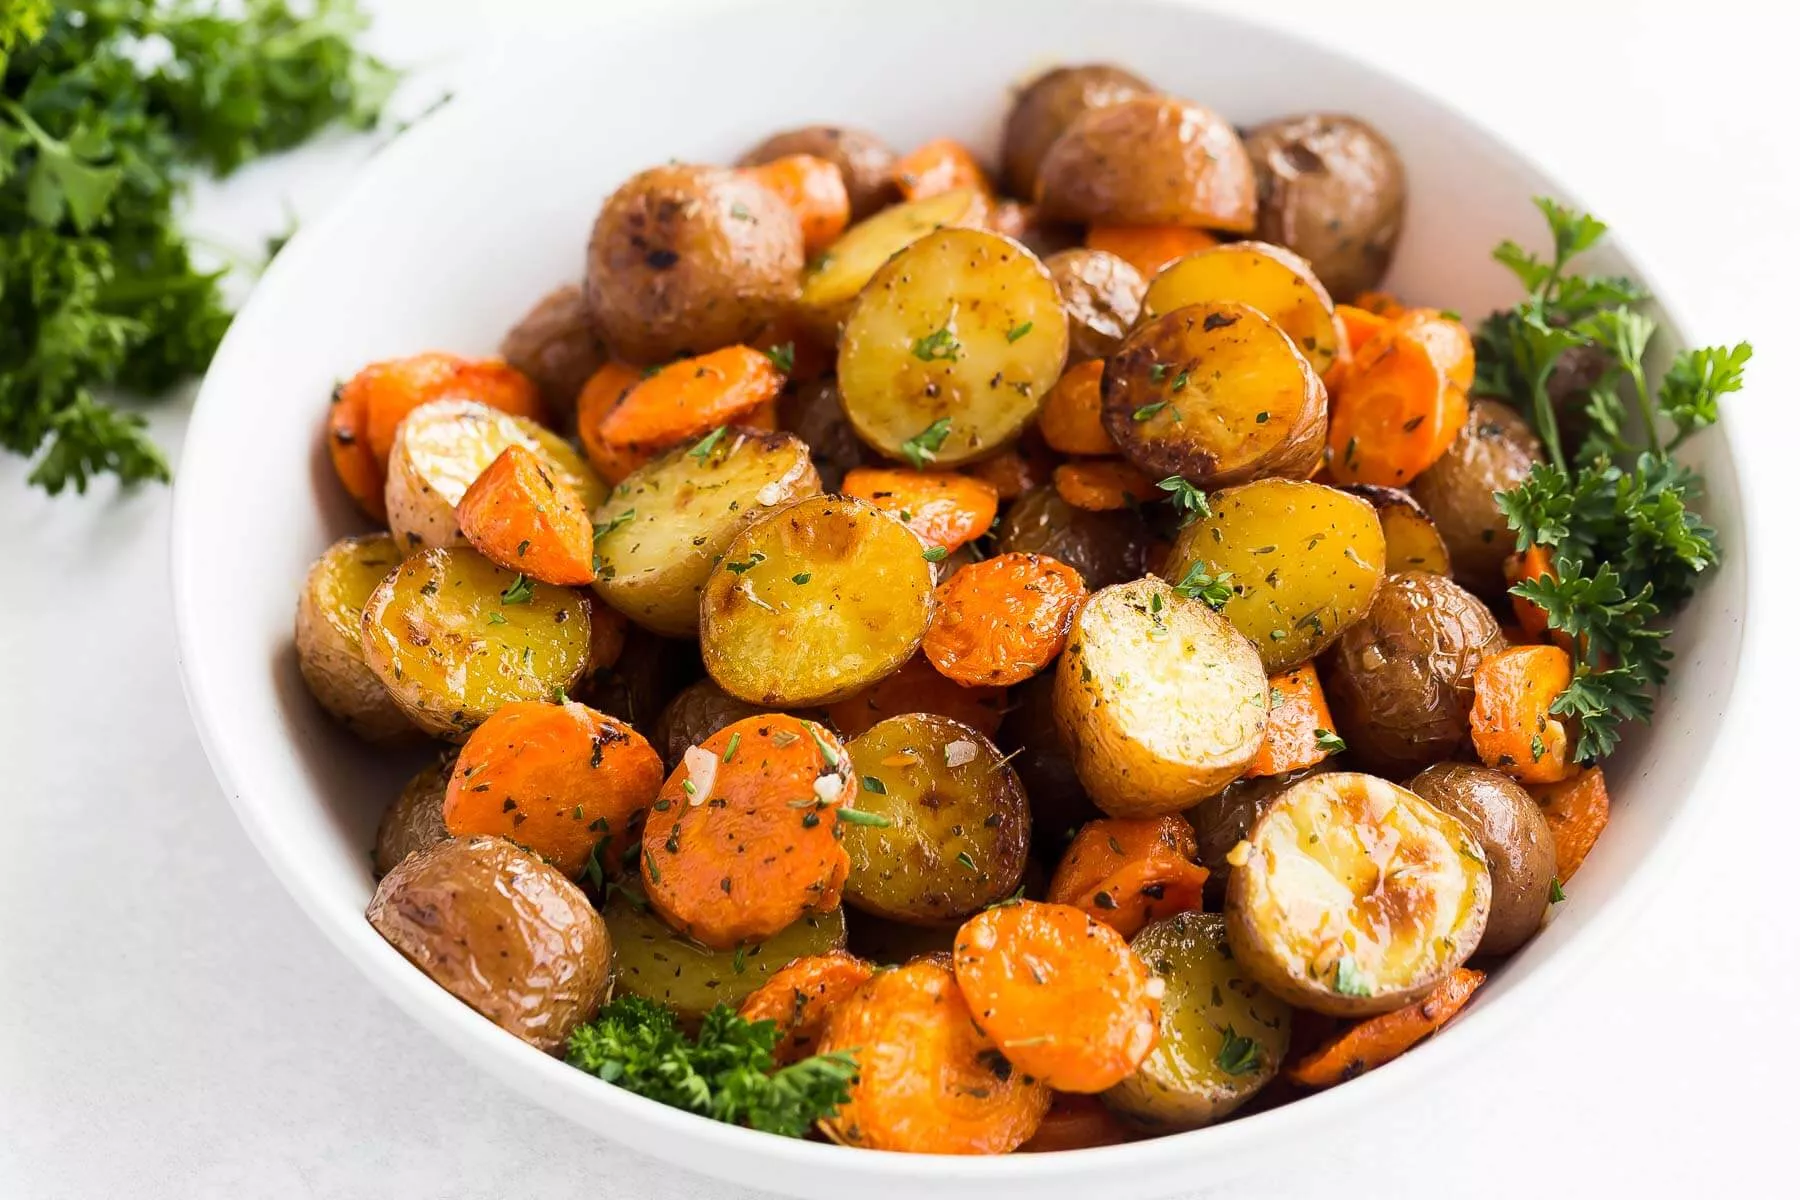 A bowl of roasted potatoes and carrots.